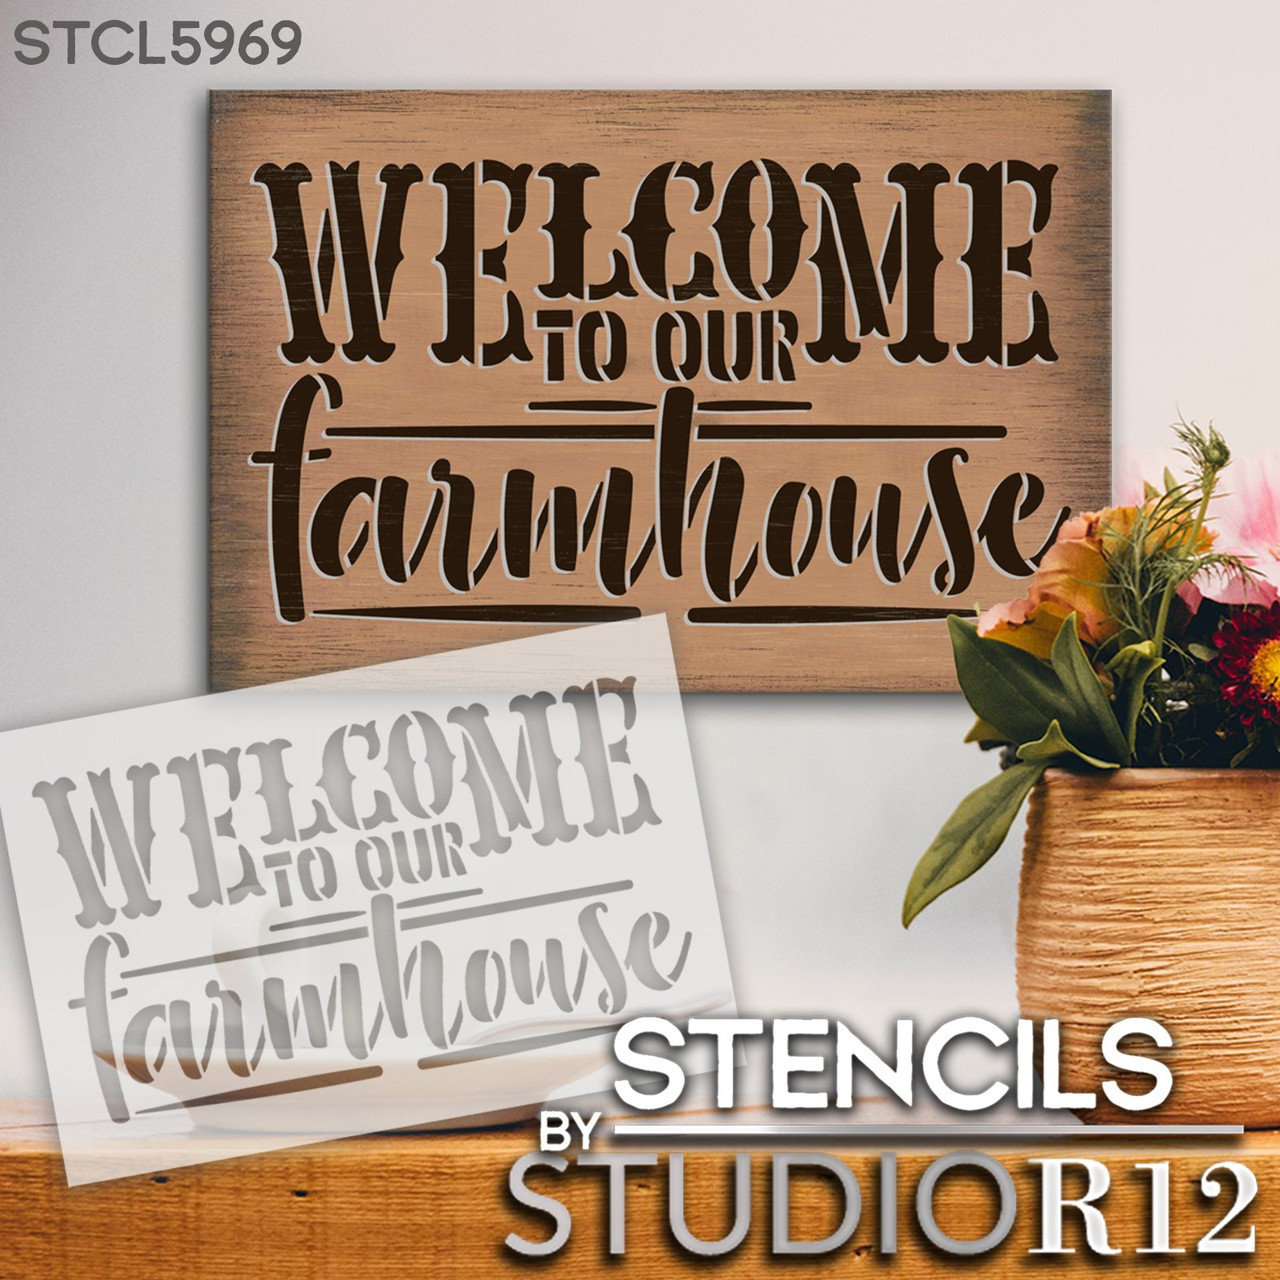 Welcome to Our Farmhouse Stencil by StudioR12 | Craft Rustic DIY Home Decor | Paint Wood Sign | Reusable Mylar Template | Select Size